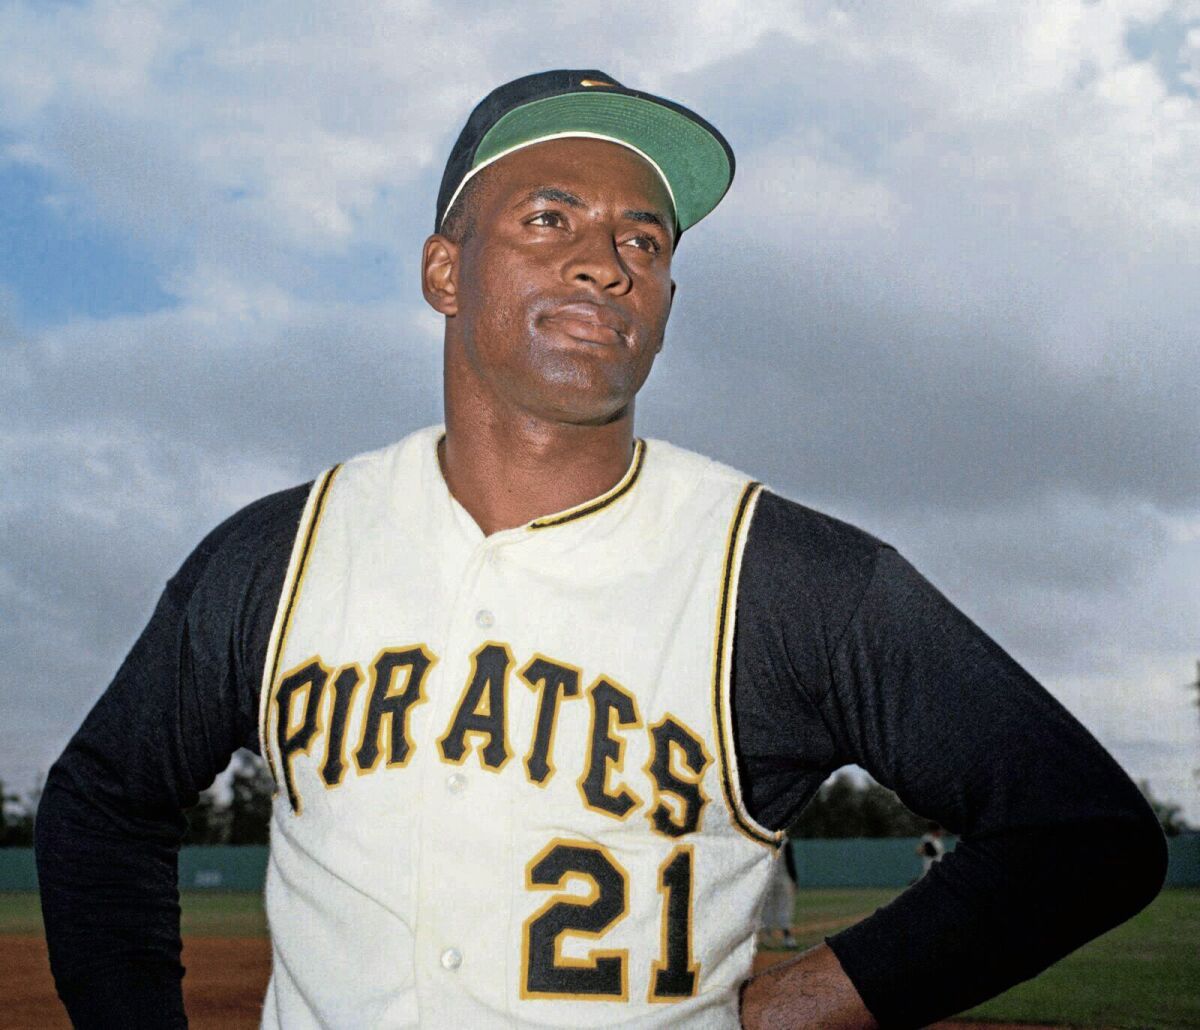 File-Pittsburgh Pirates outfielder Roberto Clemente. The Pittsburgh Pirates will honor Hall of Famer Roberto Clemente when they wear No. 21 against the Chicago White Sox on Wednesday, Sept. 9, 2020. The team believes this is an important step into having Clemente's number retired by Major League Baseball(Pittsburgh Tribune-Review via AP, File)/